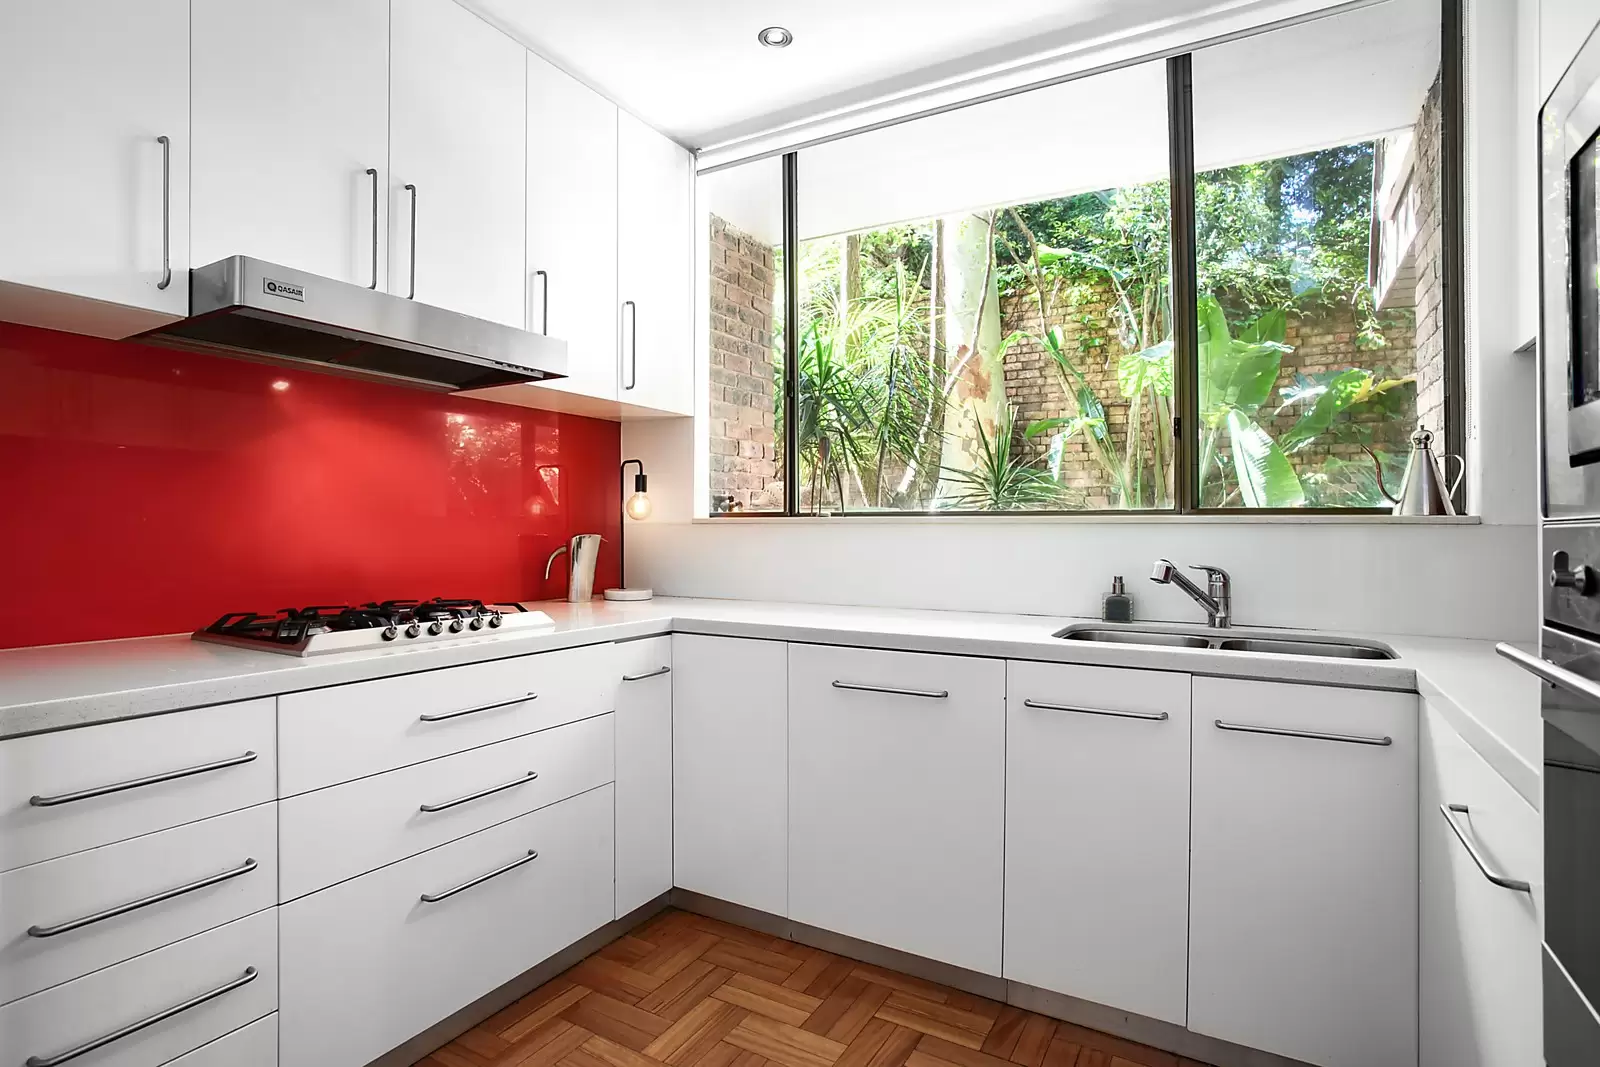 Photo #3: 6/83 Ocean Street, Woollahra - Sold by Sydney Sotheby's International Realty